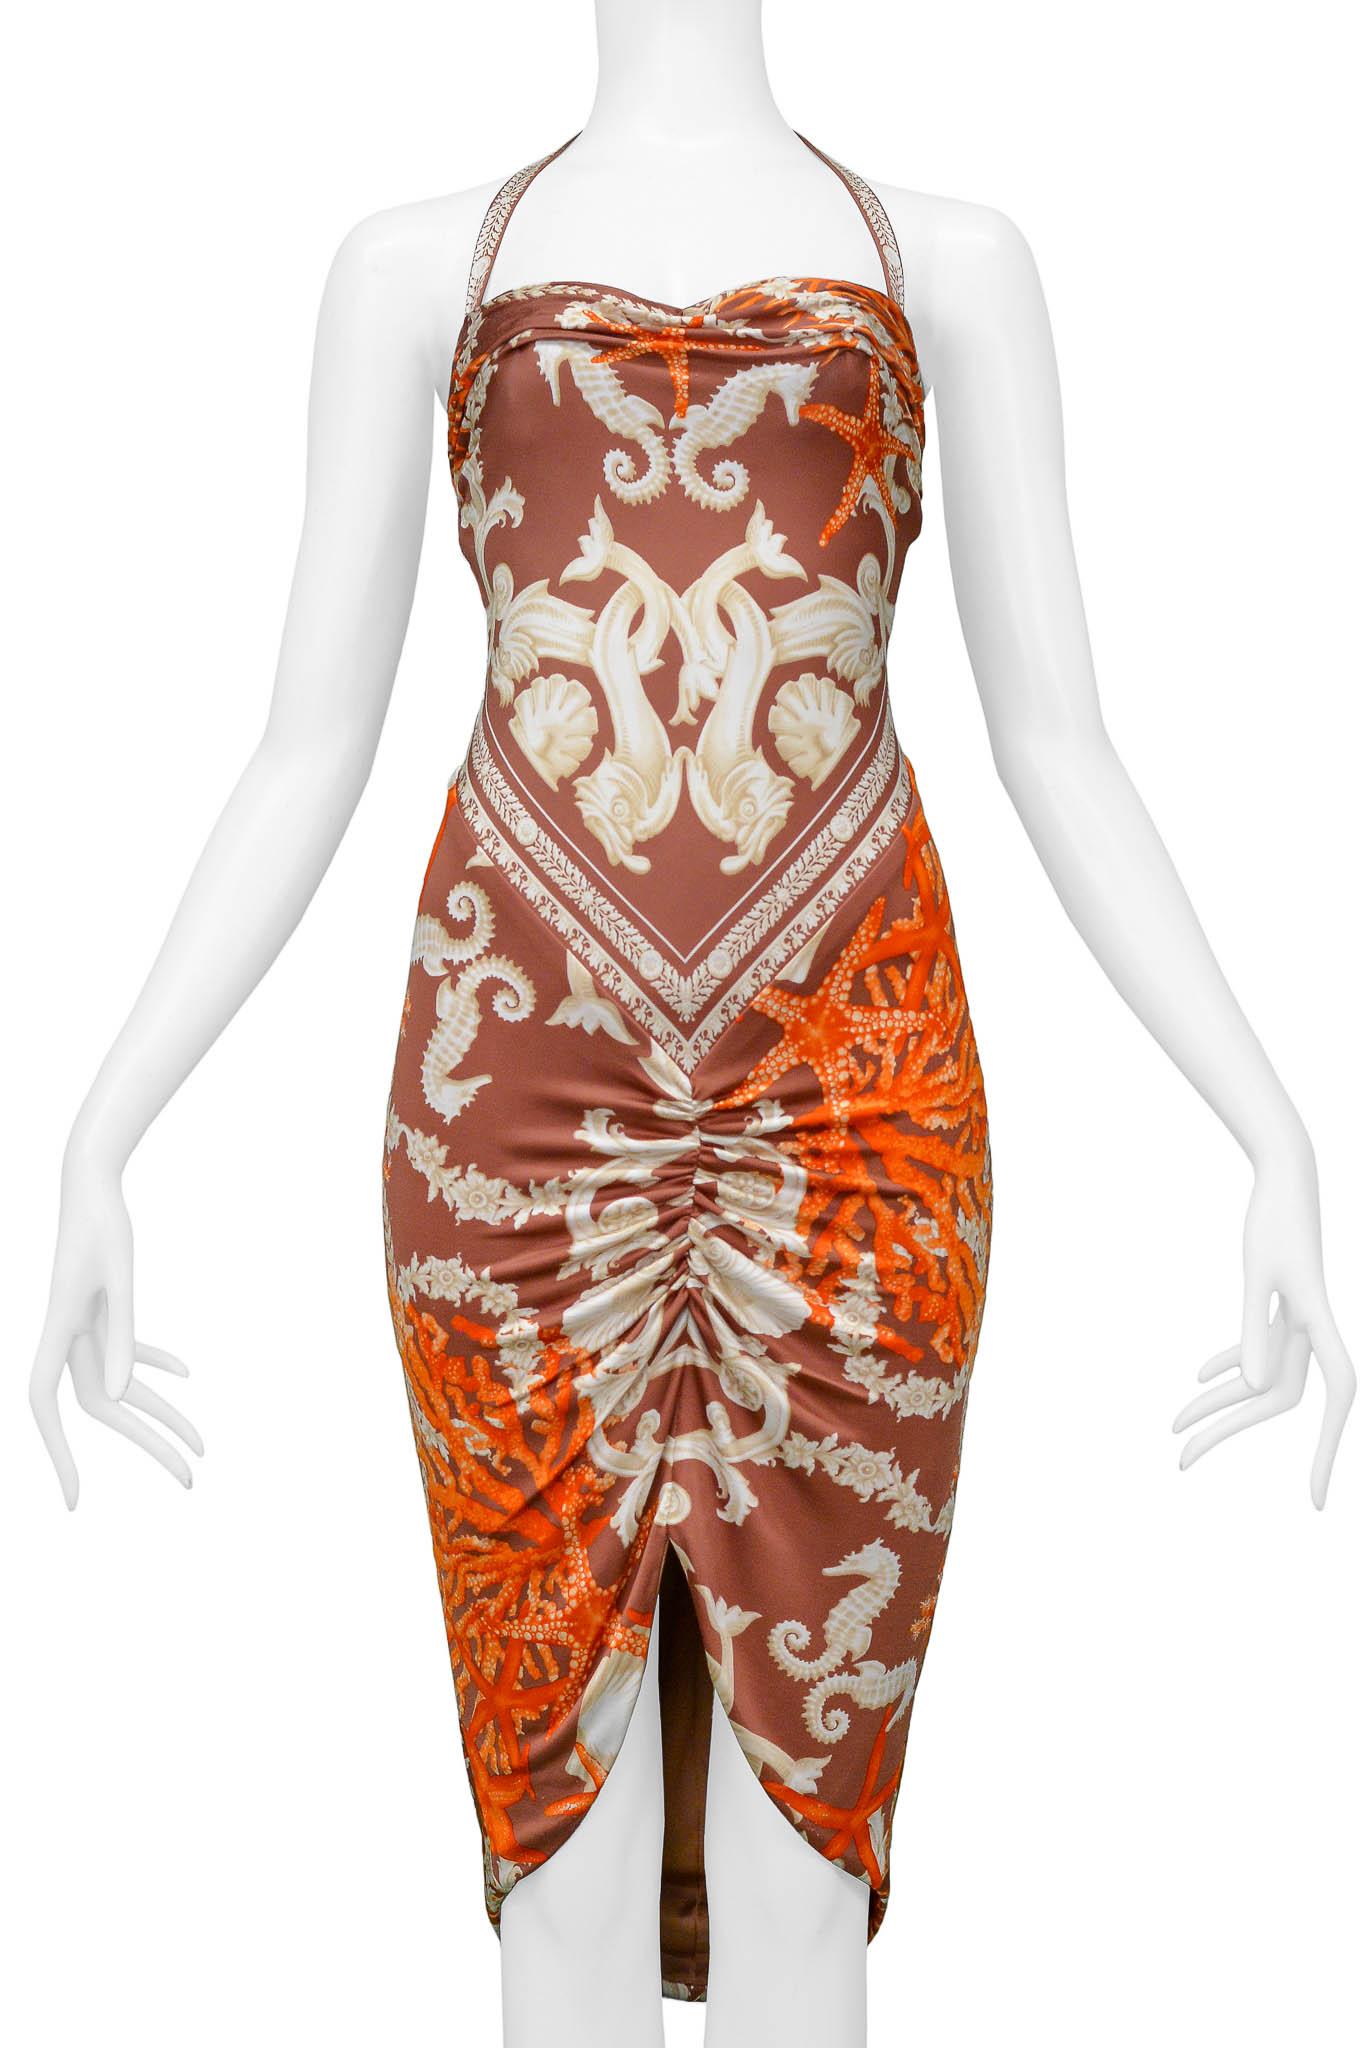 Versace 2005 Seahorse & Coral Print Halter Dress In Excellent Condition For Sale In Los Angeles, CA